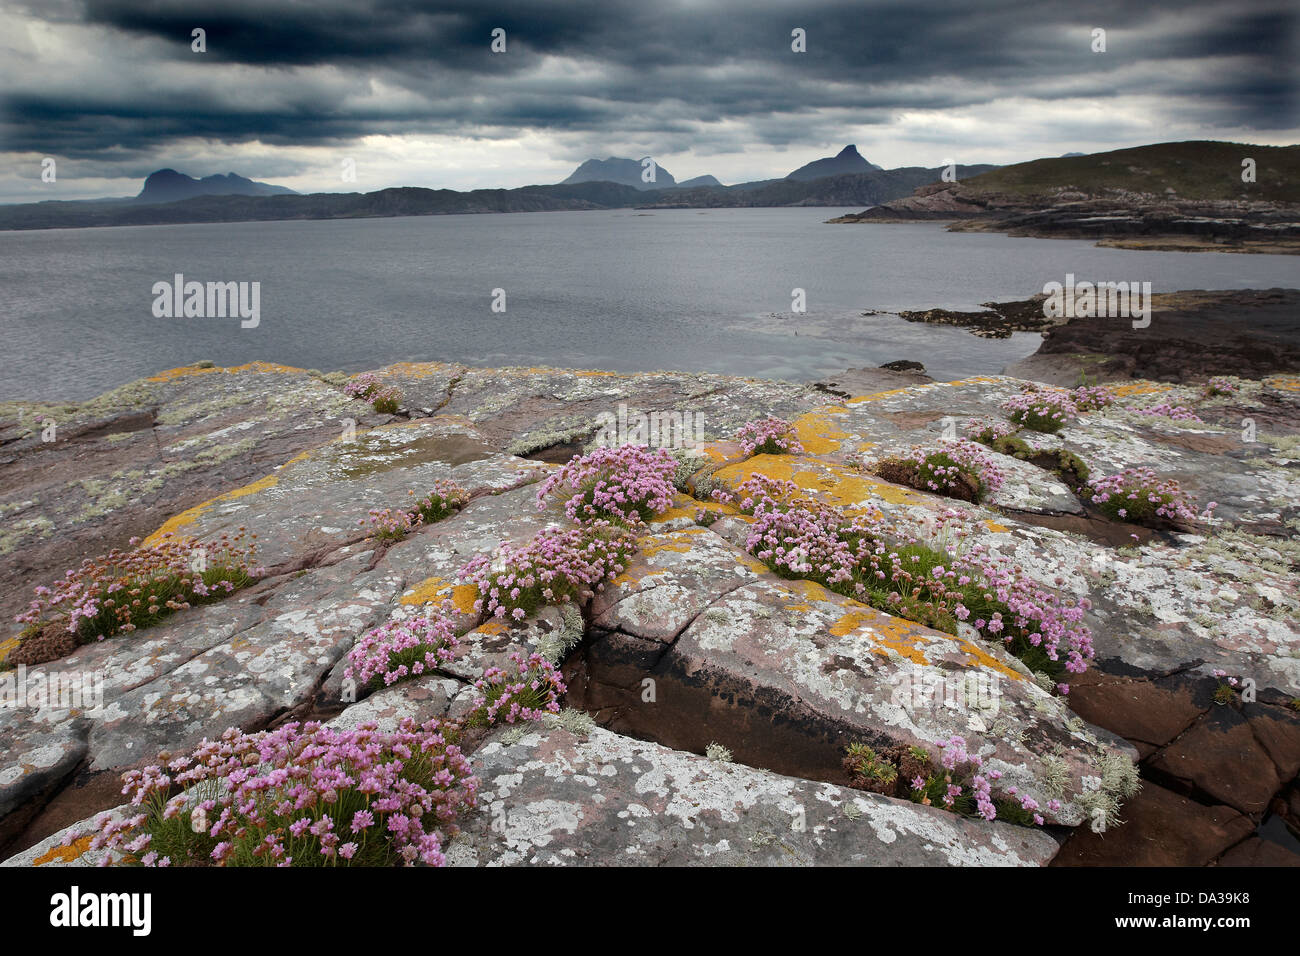 Rocks covered in Thrift and lichen under a dramatic sky on the shoreline of Enard Bay, Sutherland, North West, Scotland, UK Stock Photo